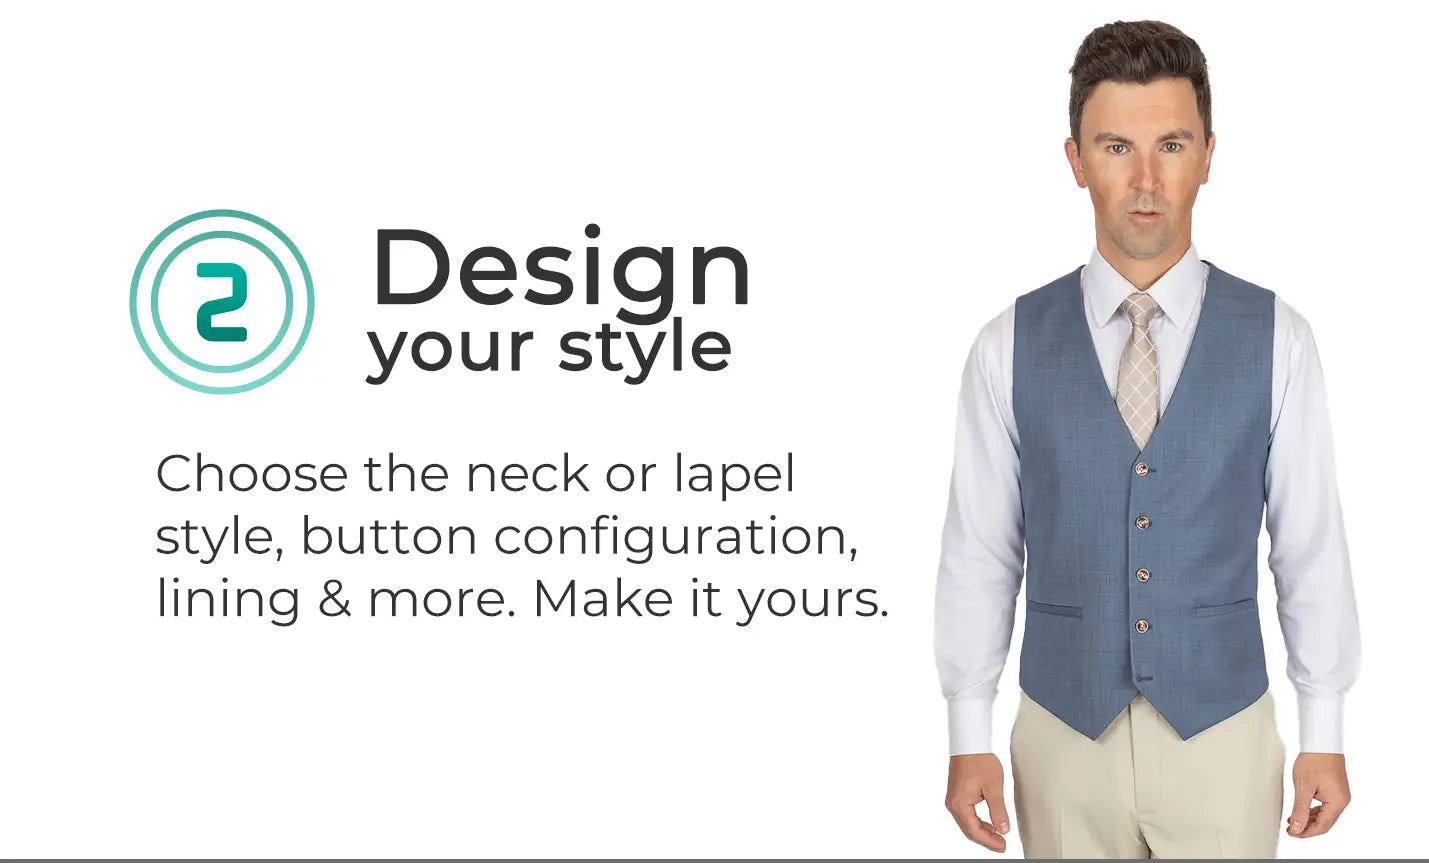 Design your style. Choose the neck or lapel style, button configuration, lining and more. Make it yours. Man in vest.